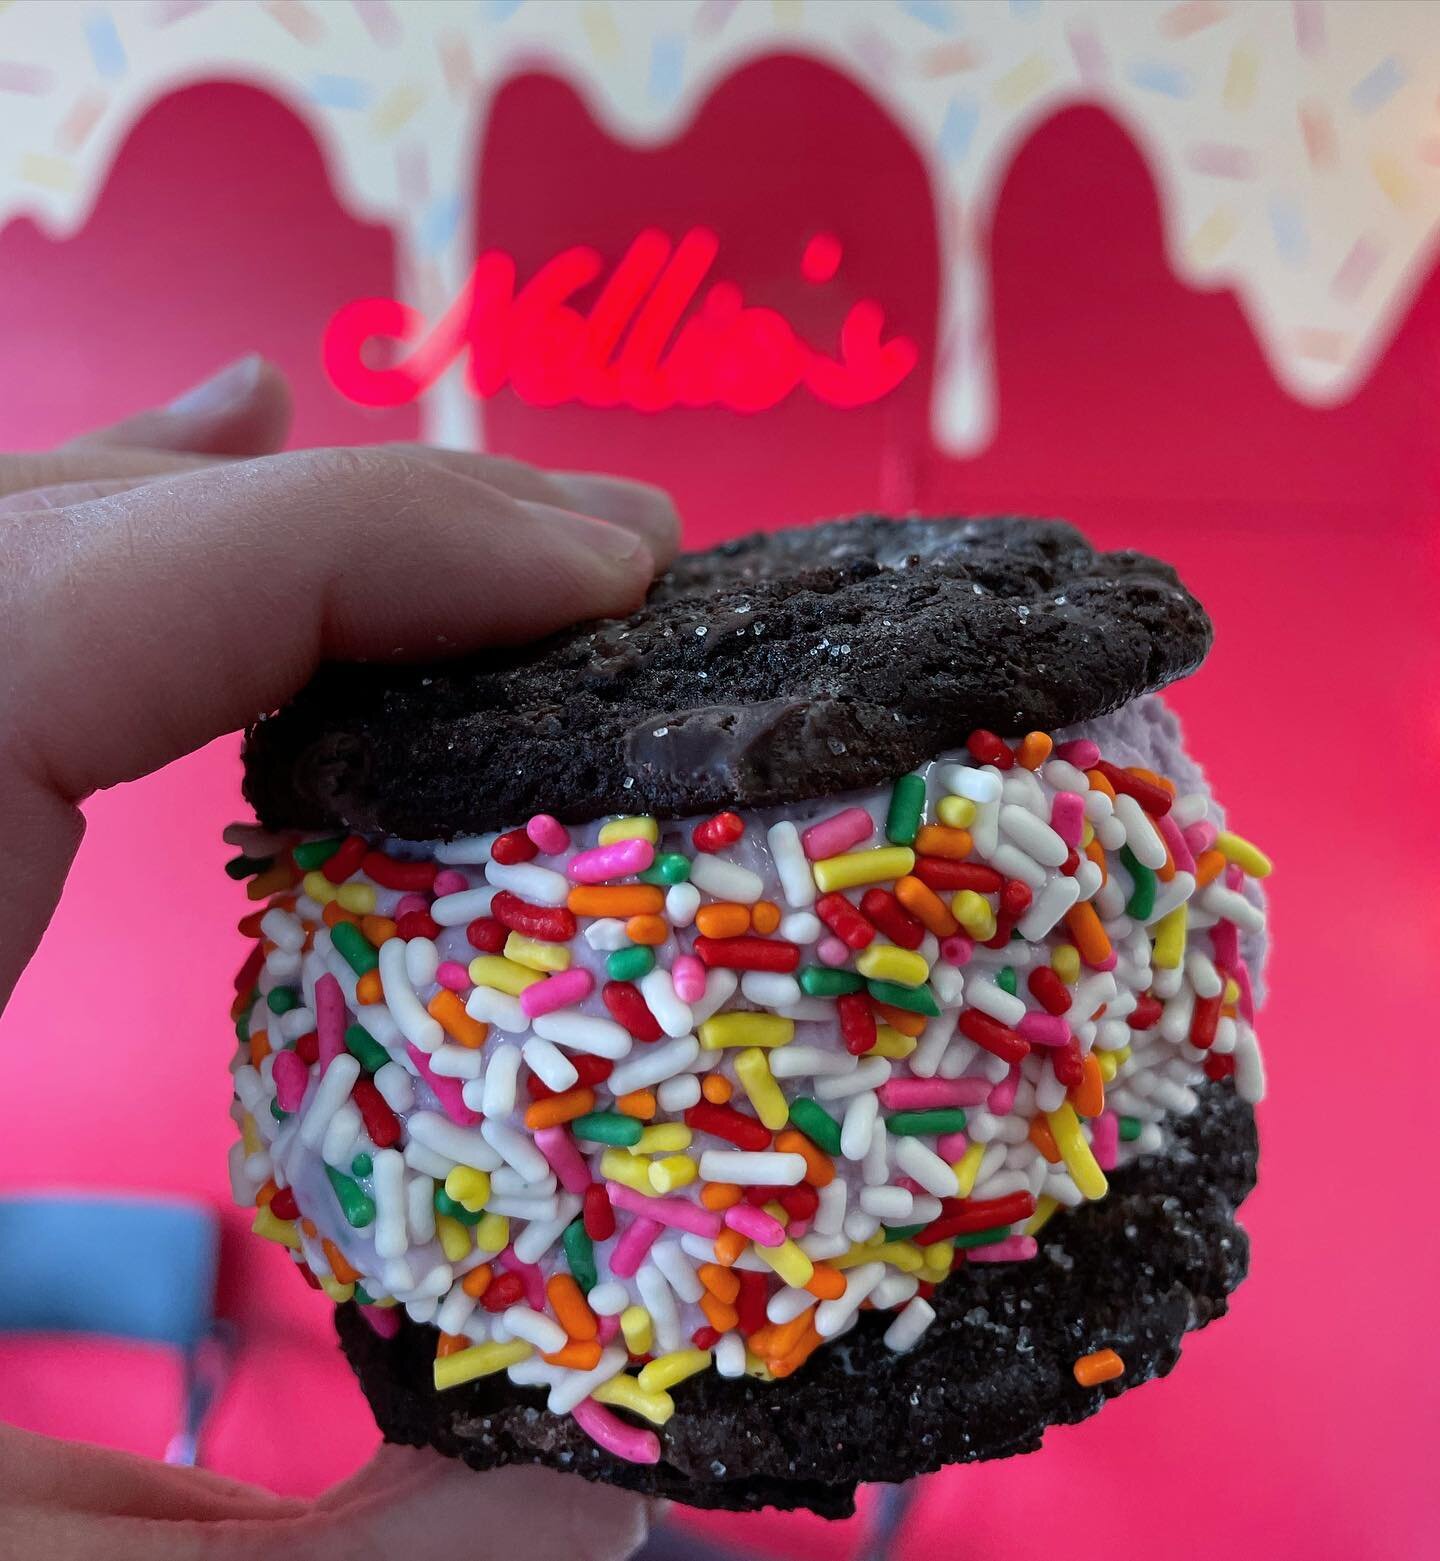 NOW OPEN FOR THE SEASON! Sun is out ☀️ and spring is in the air; come get your scoop! 📷 chocolate chocolate chip cookies with blackberry lavender Icecream (NEW) rolled in rainbow sprinkles and hot pressed. #nelliesicecream #icecreamcookiesandwich